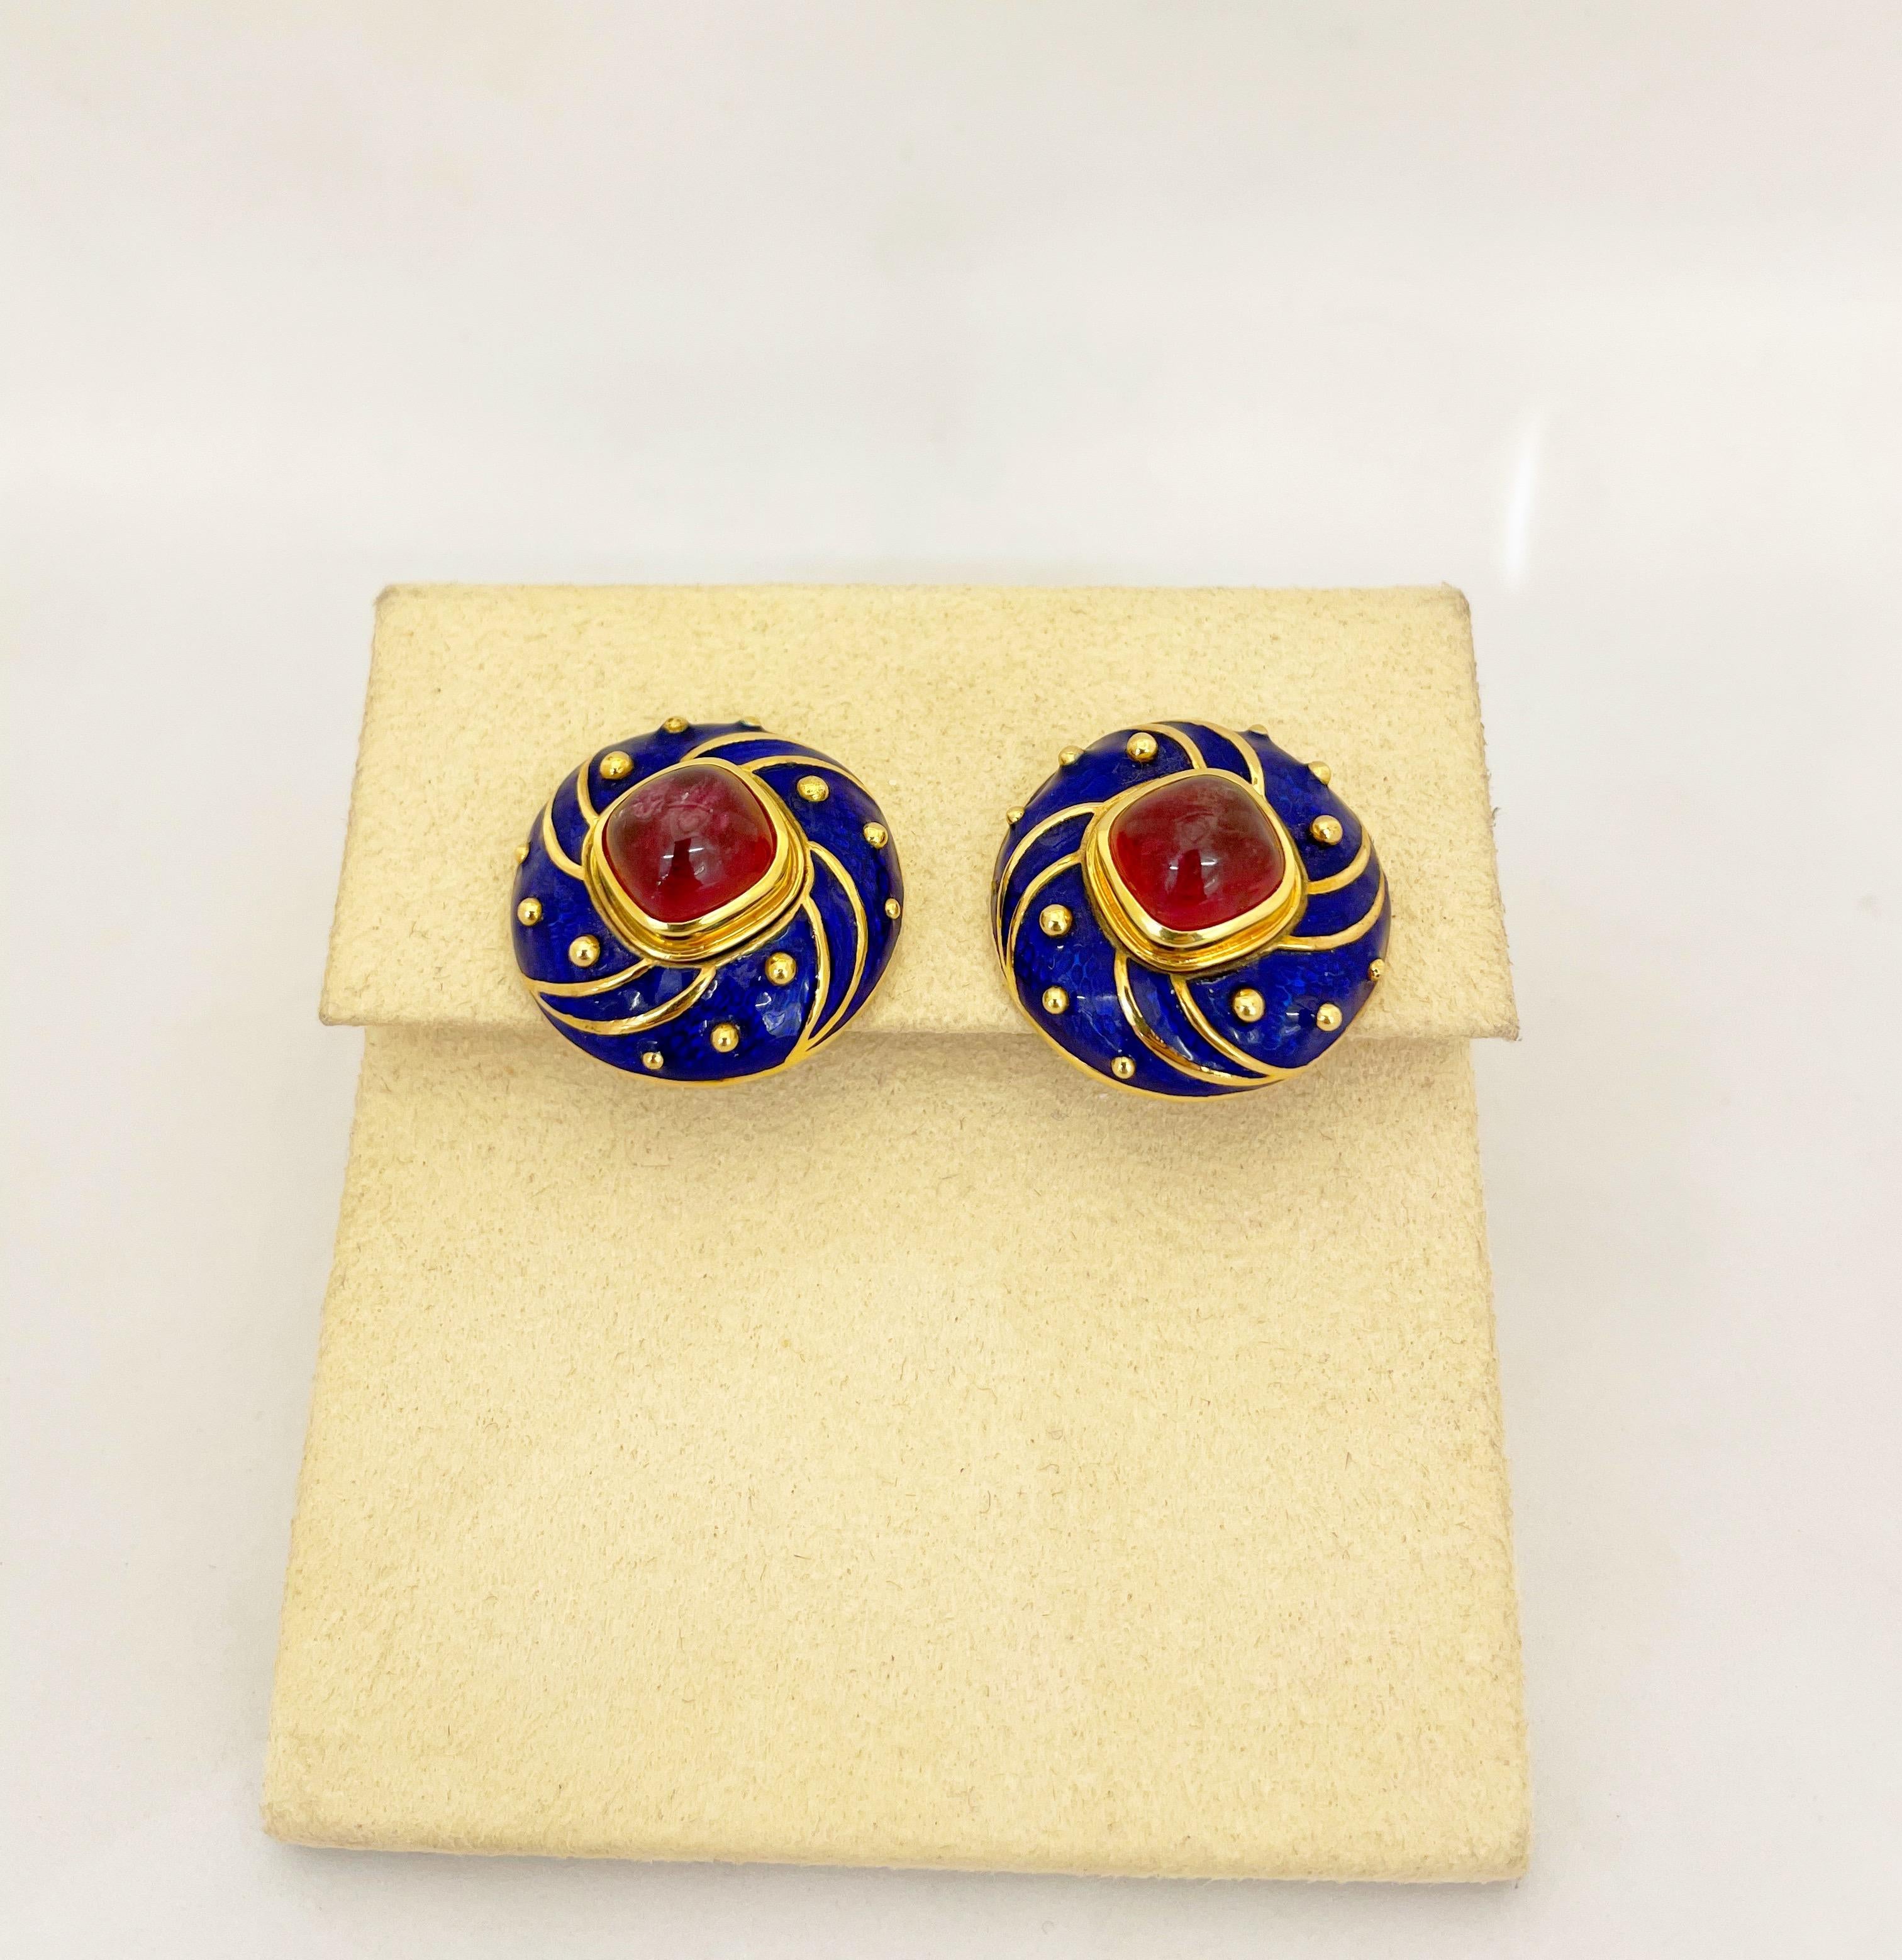 Contemporary 18 Karat Yellow Gold Blue Enamel Earrings with Cabochon Pink Tourmaline Centers